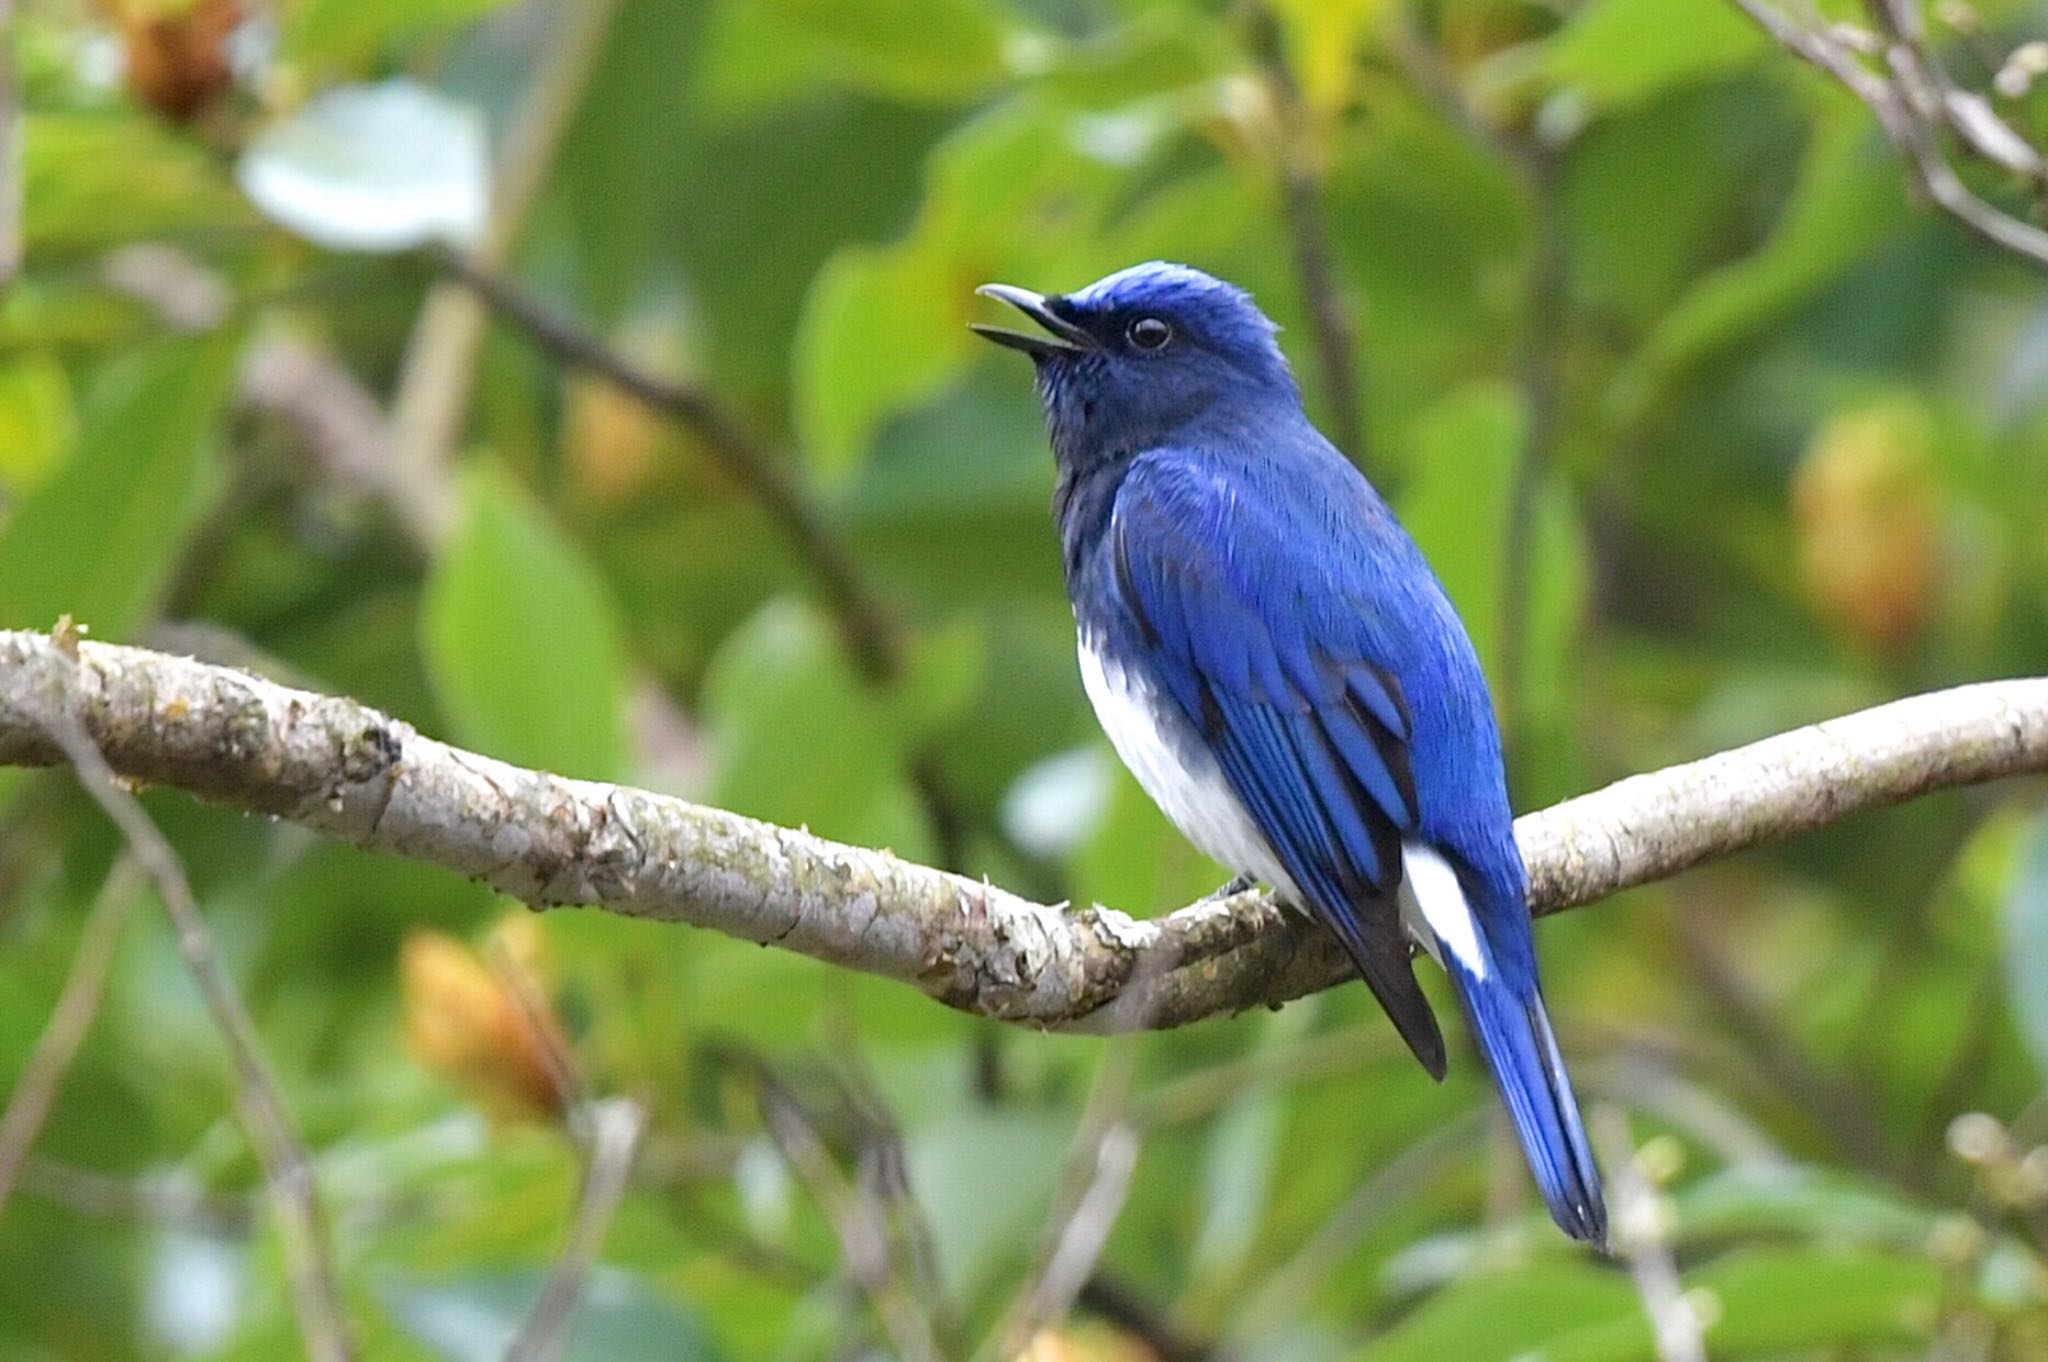 Photo of Blue-and-white Flycatcher at 油山市民の森 by にょろちょろ